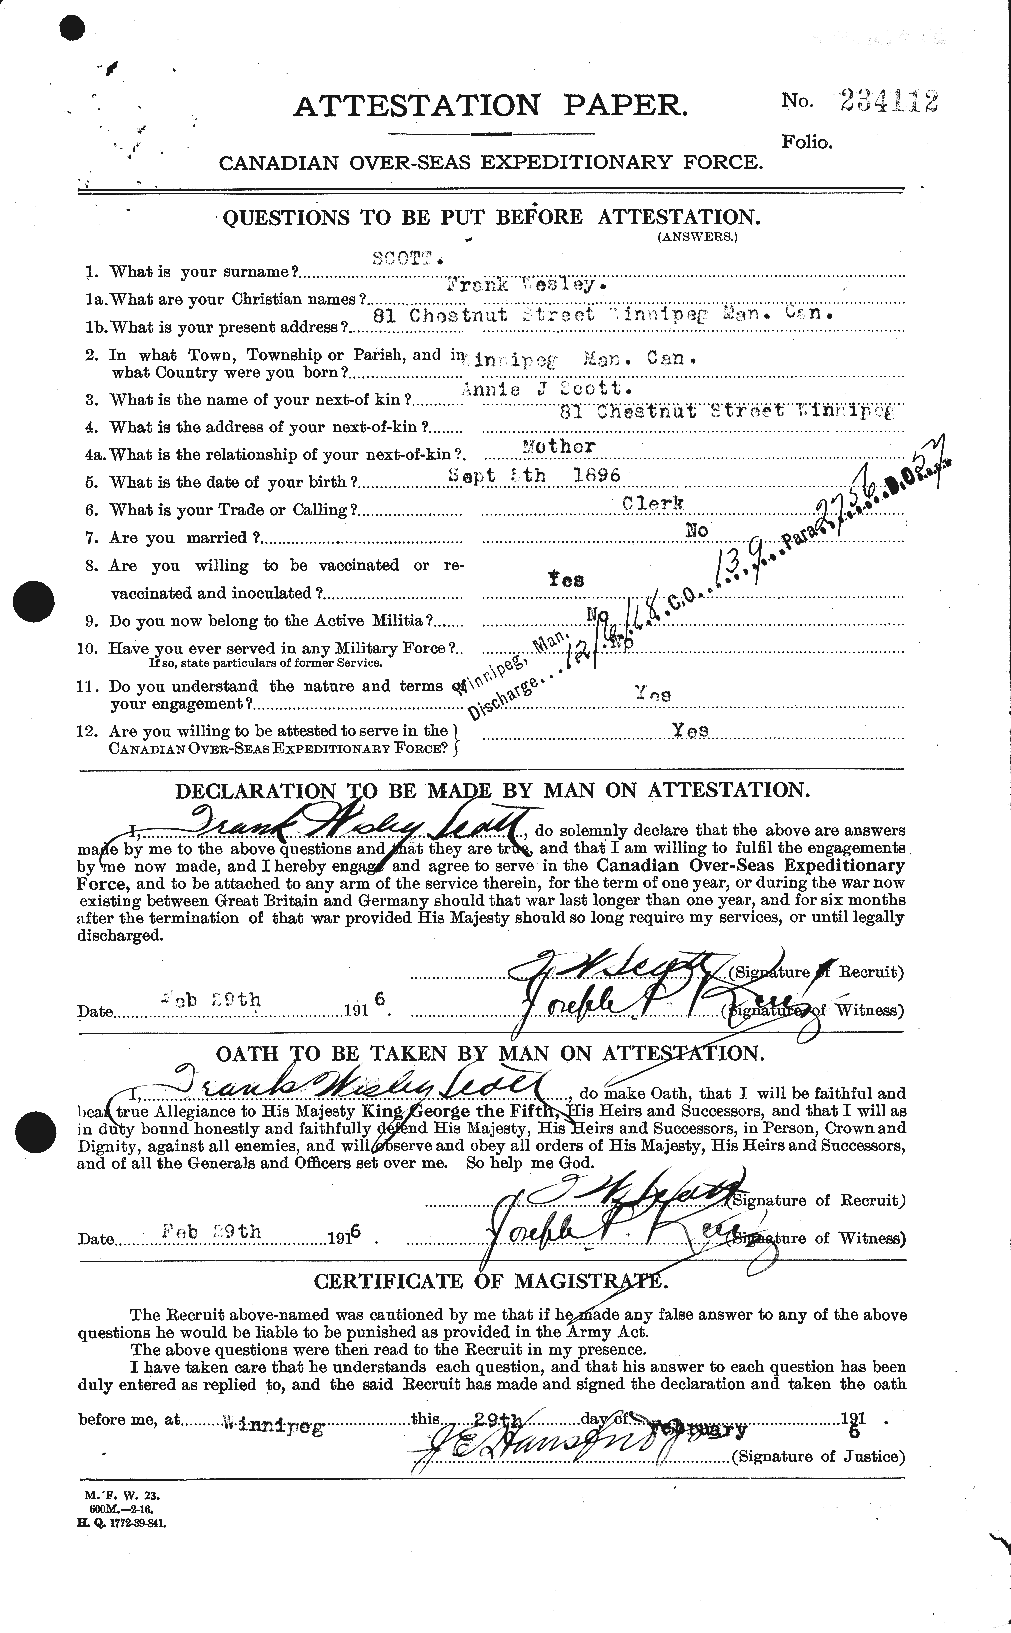 Personnel Records of the First World War - CEF 084688a